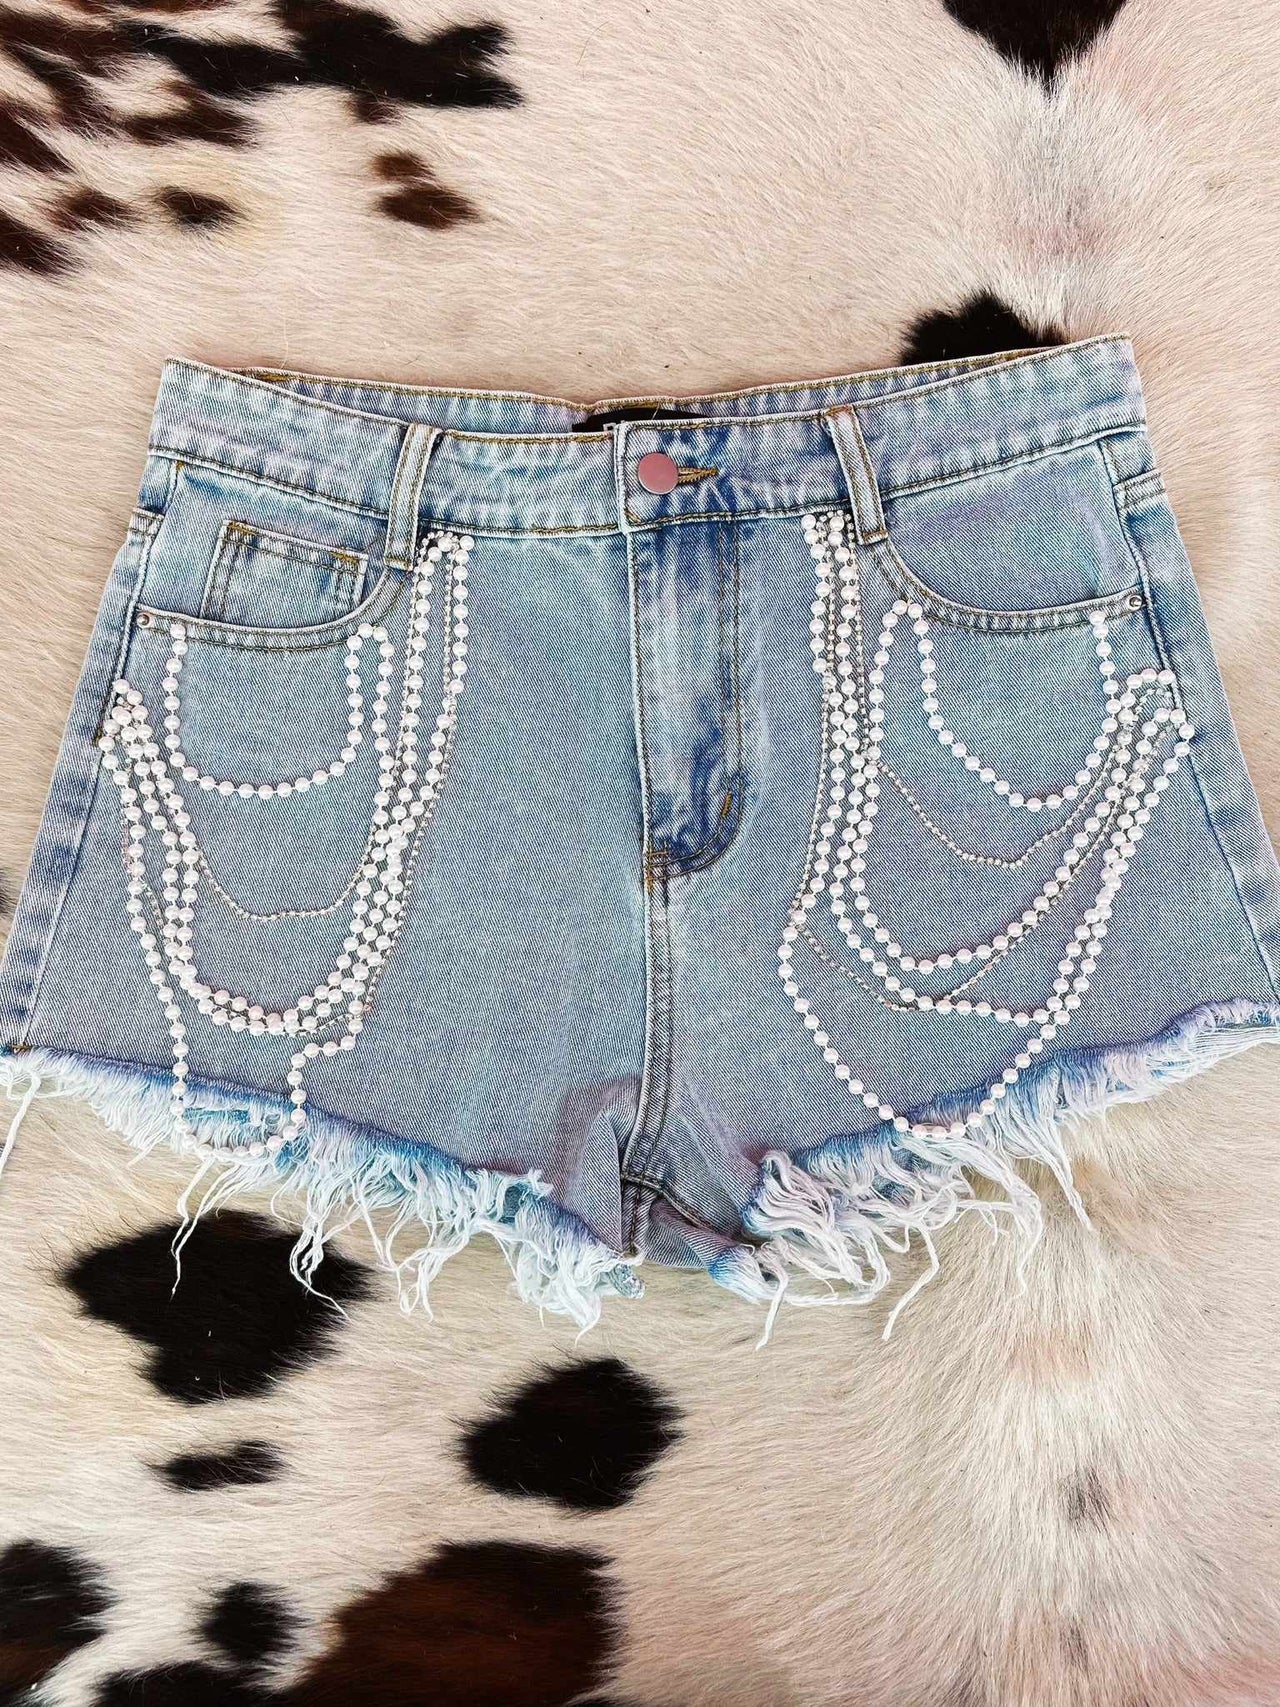 Distressed jean shorts with pearls chain